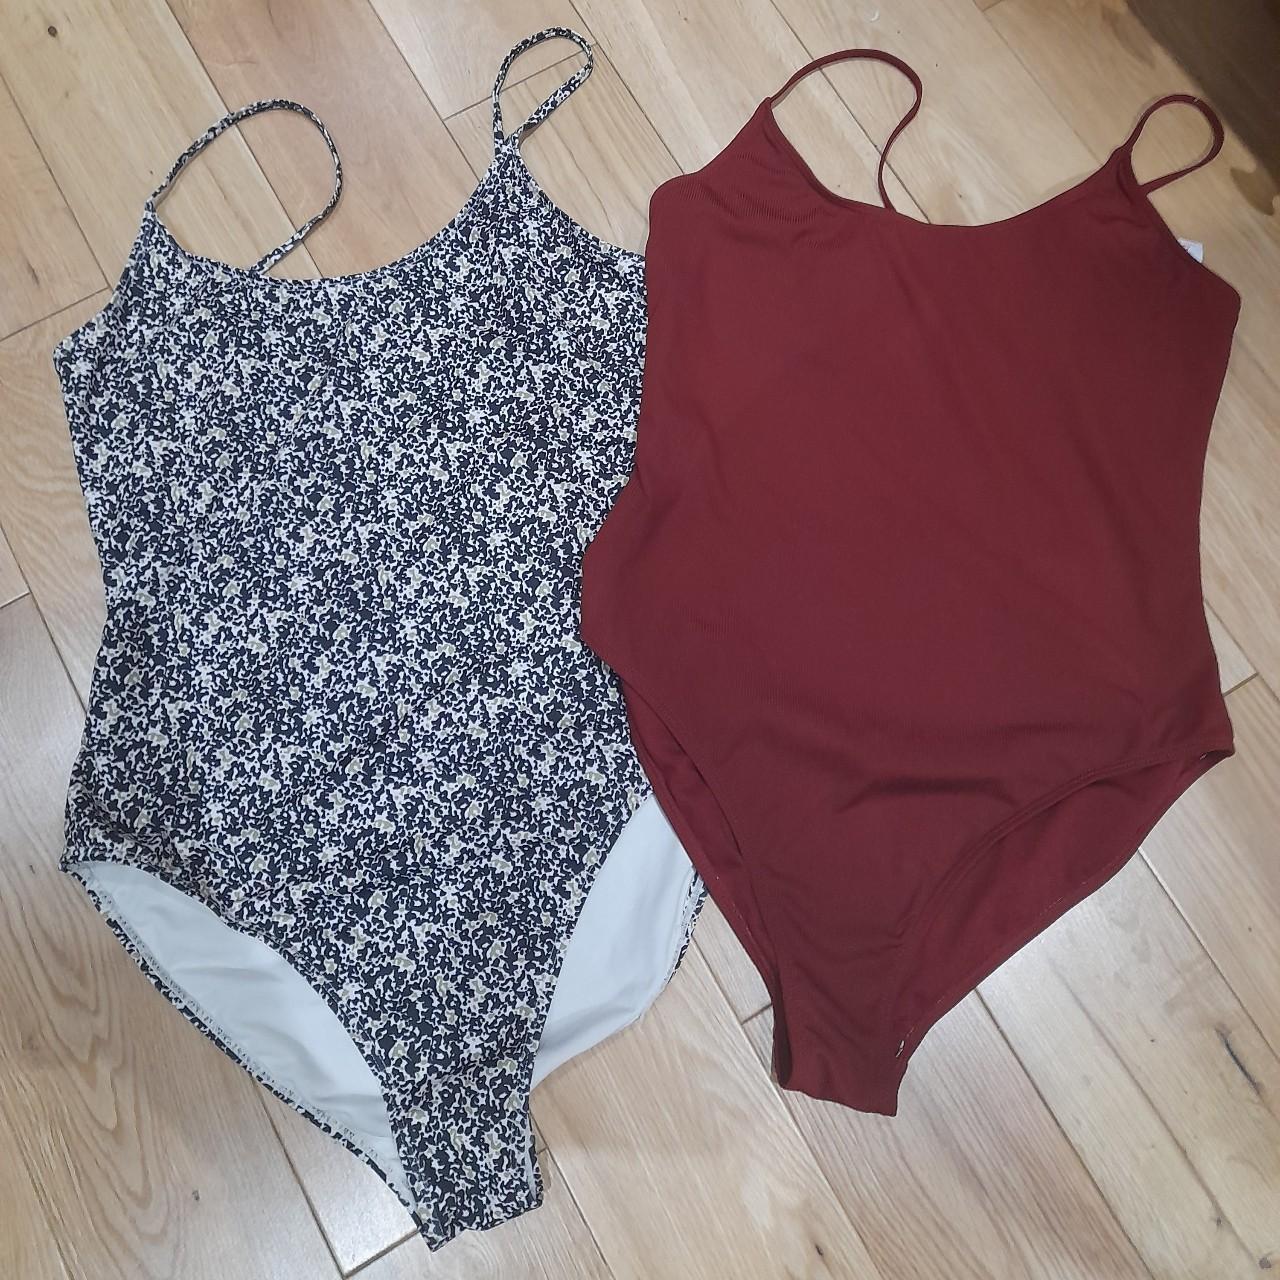 2 x swimsuits from primark size 16 unworn with... - Depop